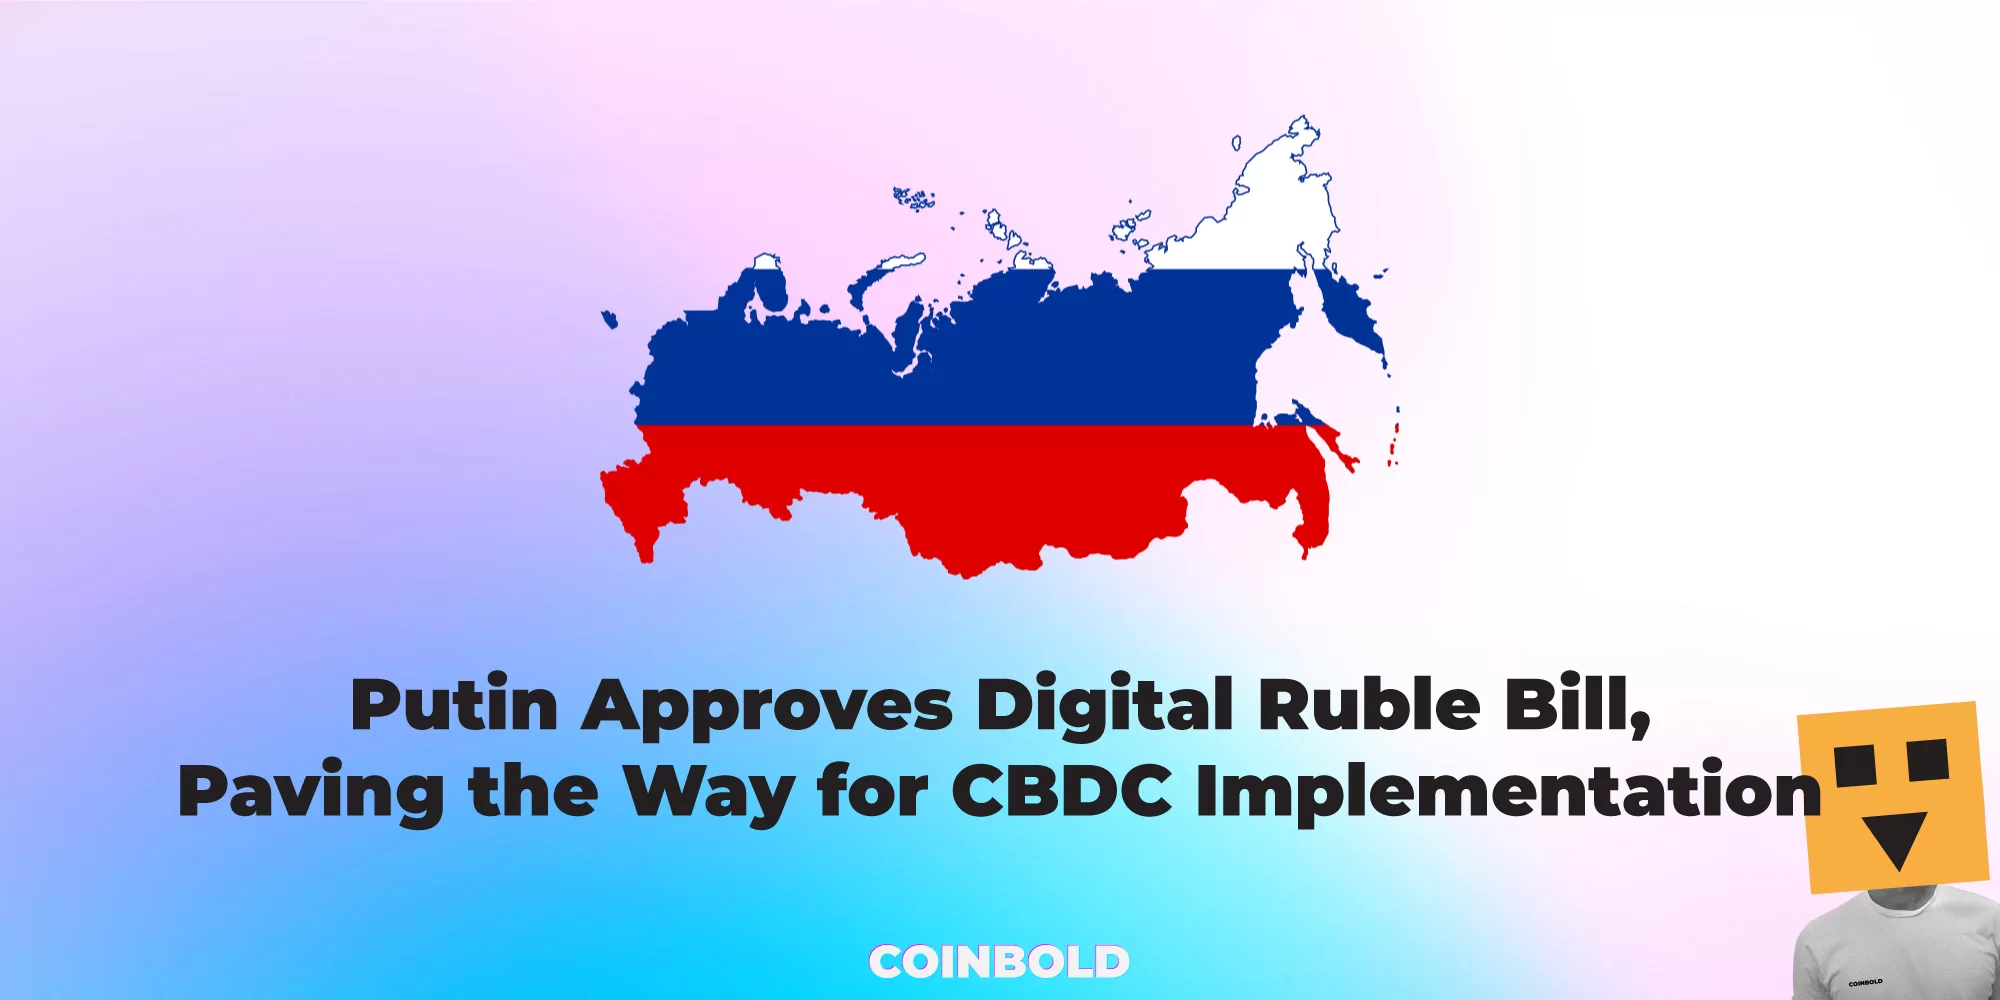 Putin Approves Digital Ruble Bill, Paving the Way for CBDC Implementation